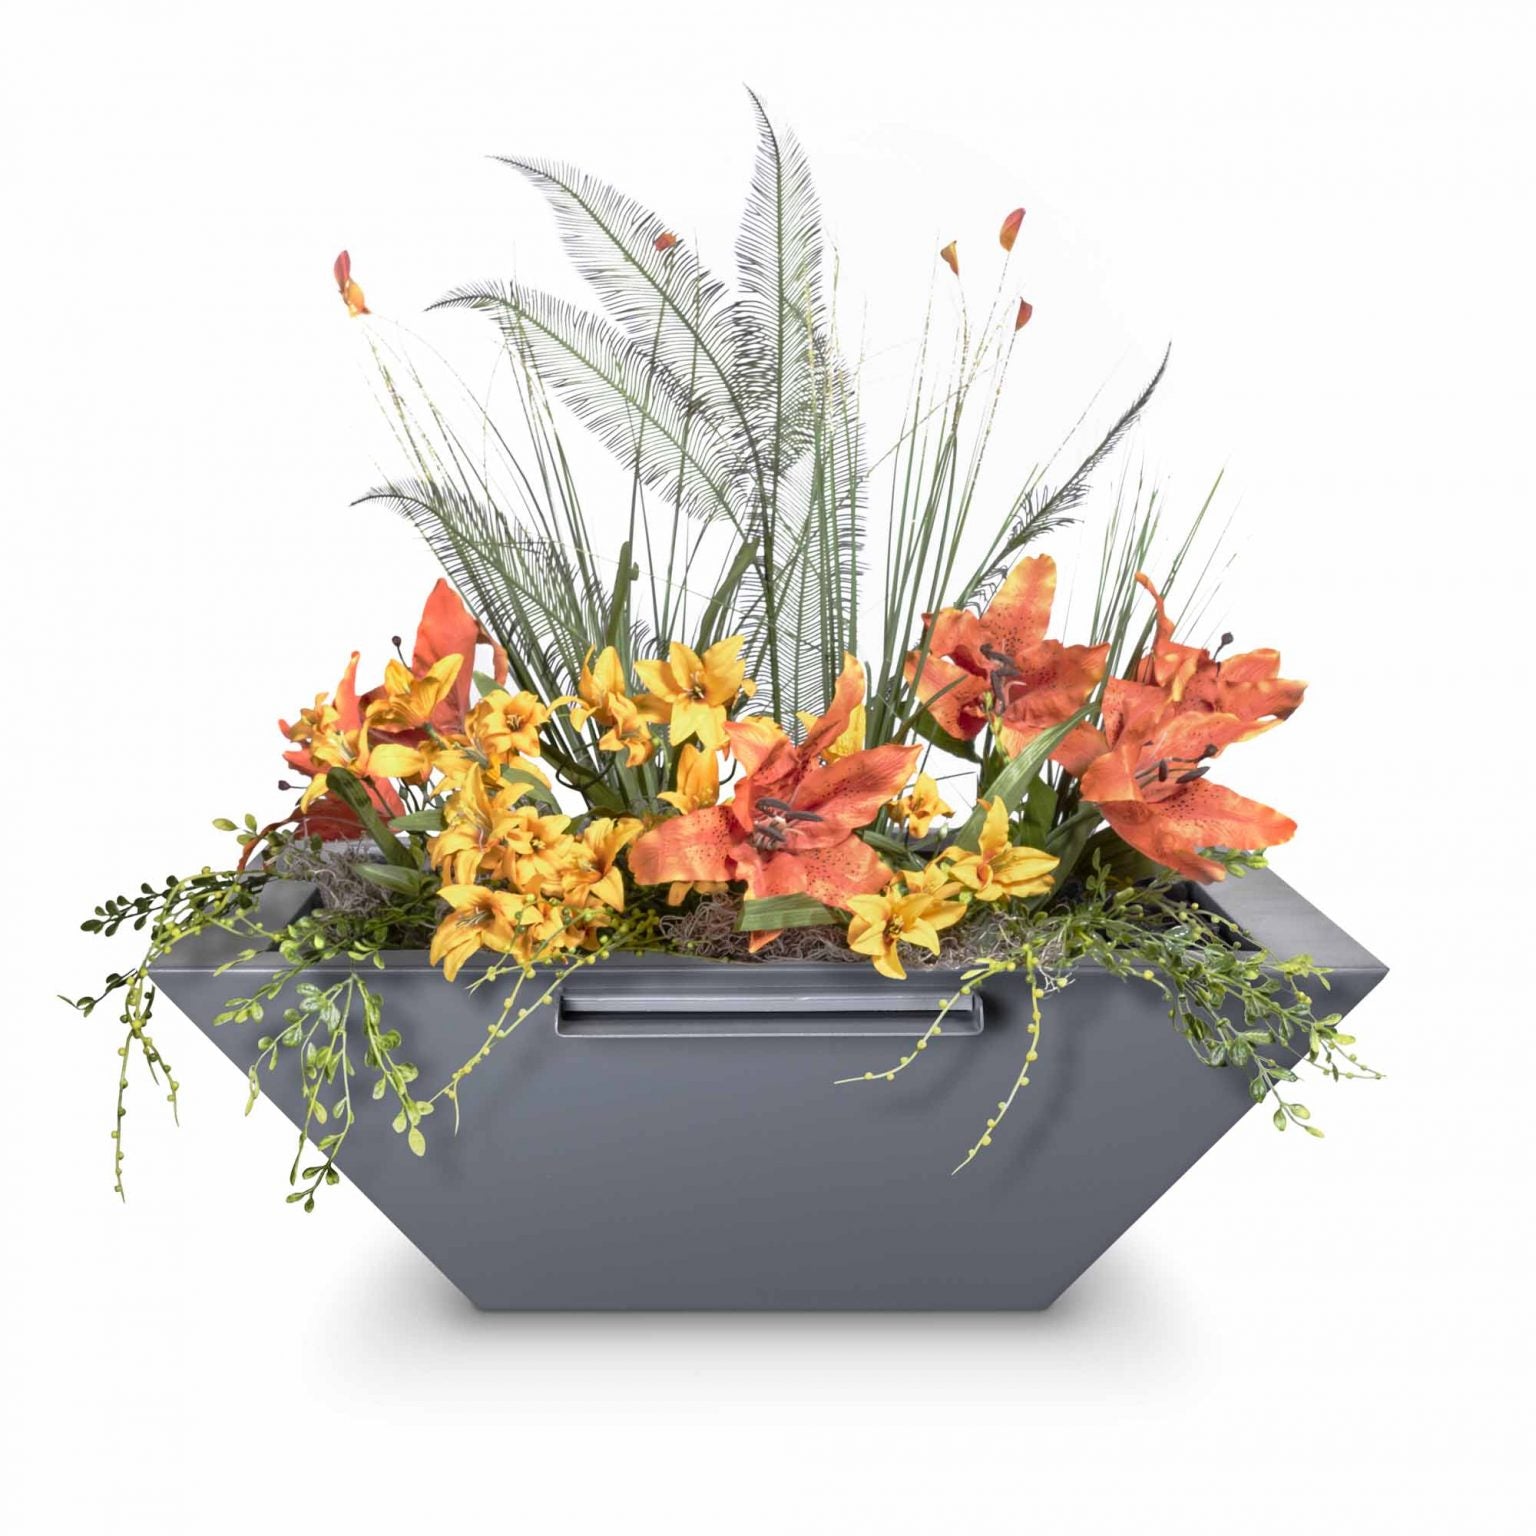 The Outdoor Plus Maya Planter & Water Bowl Powder Coated Metal OPT-XXSQPCPW - Serenity Provision